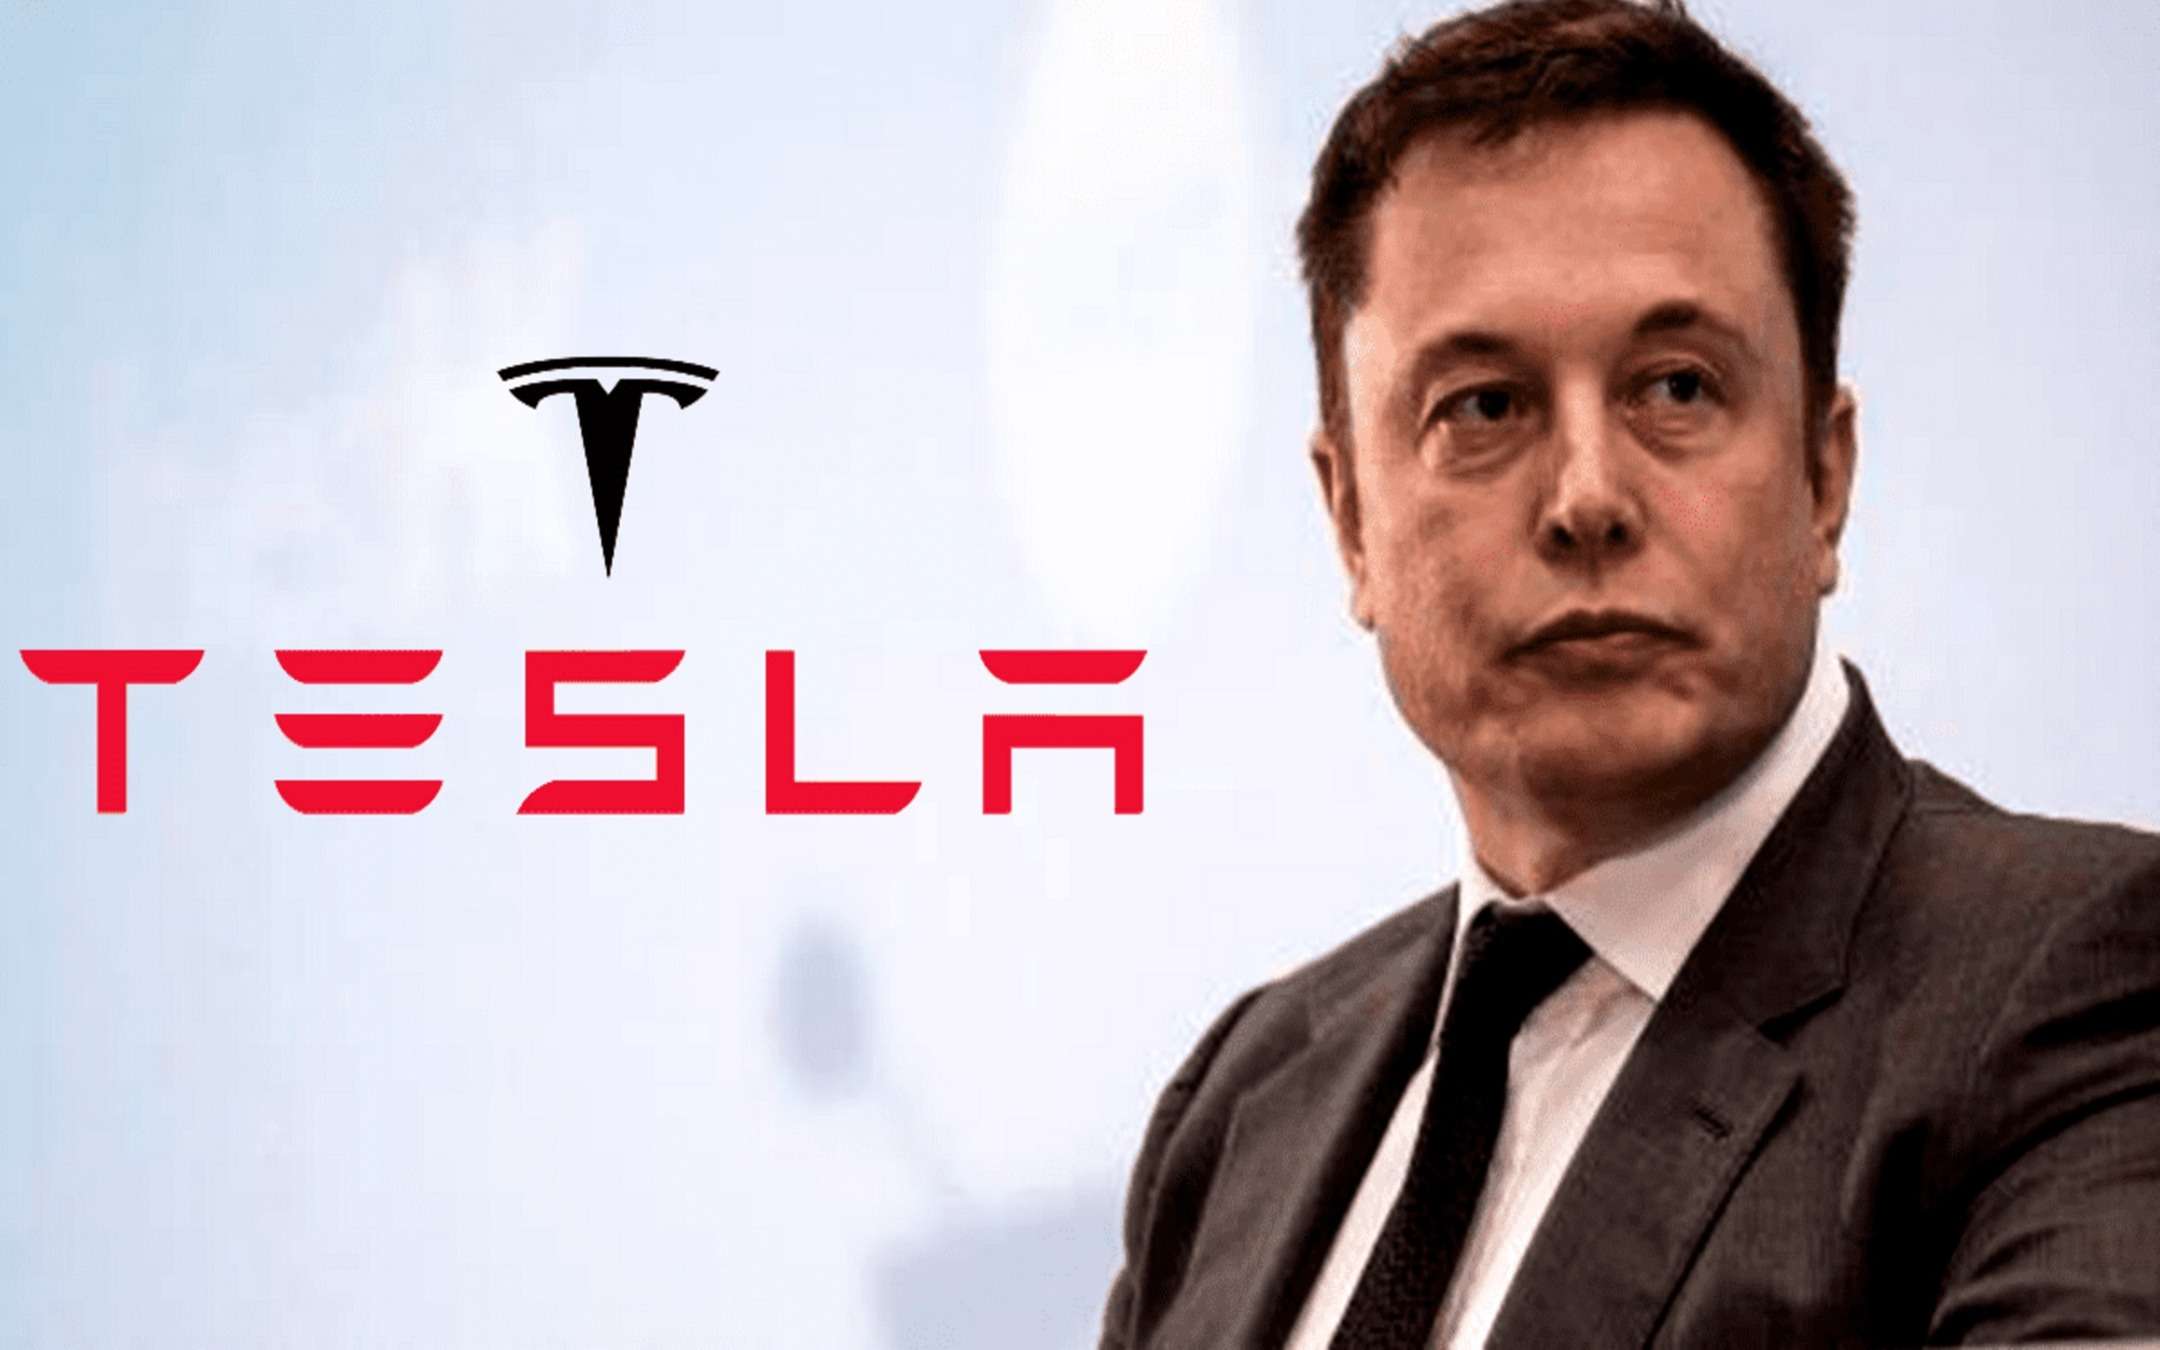 Elon Musk co-founded and leads Tesla